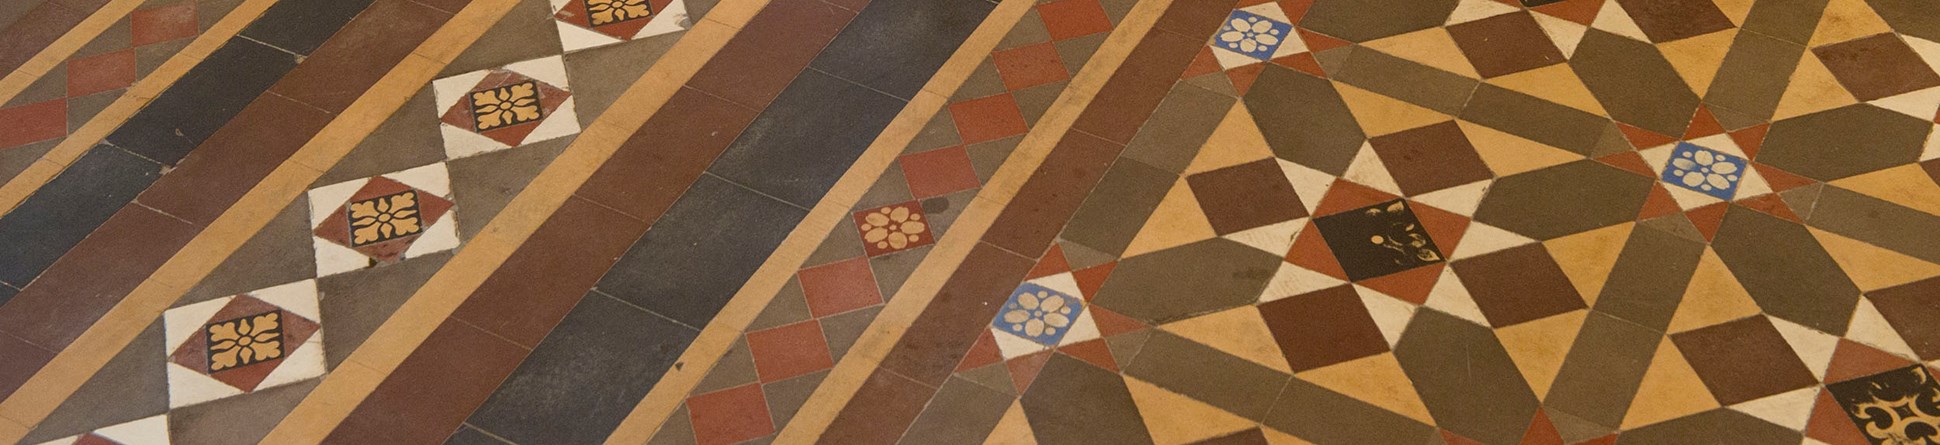 Image of historic floor tiles set out in an intricate pattern.